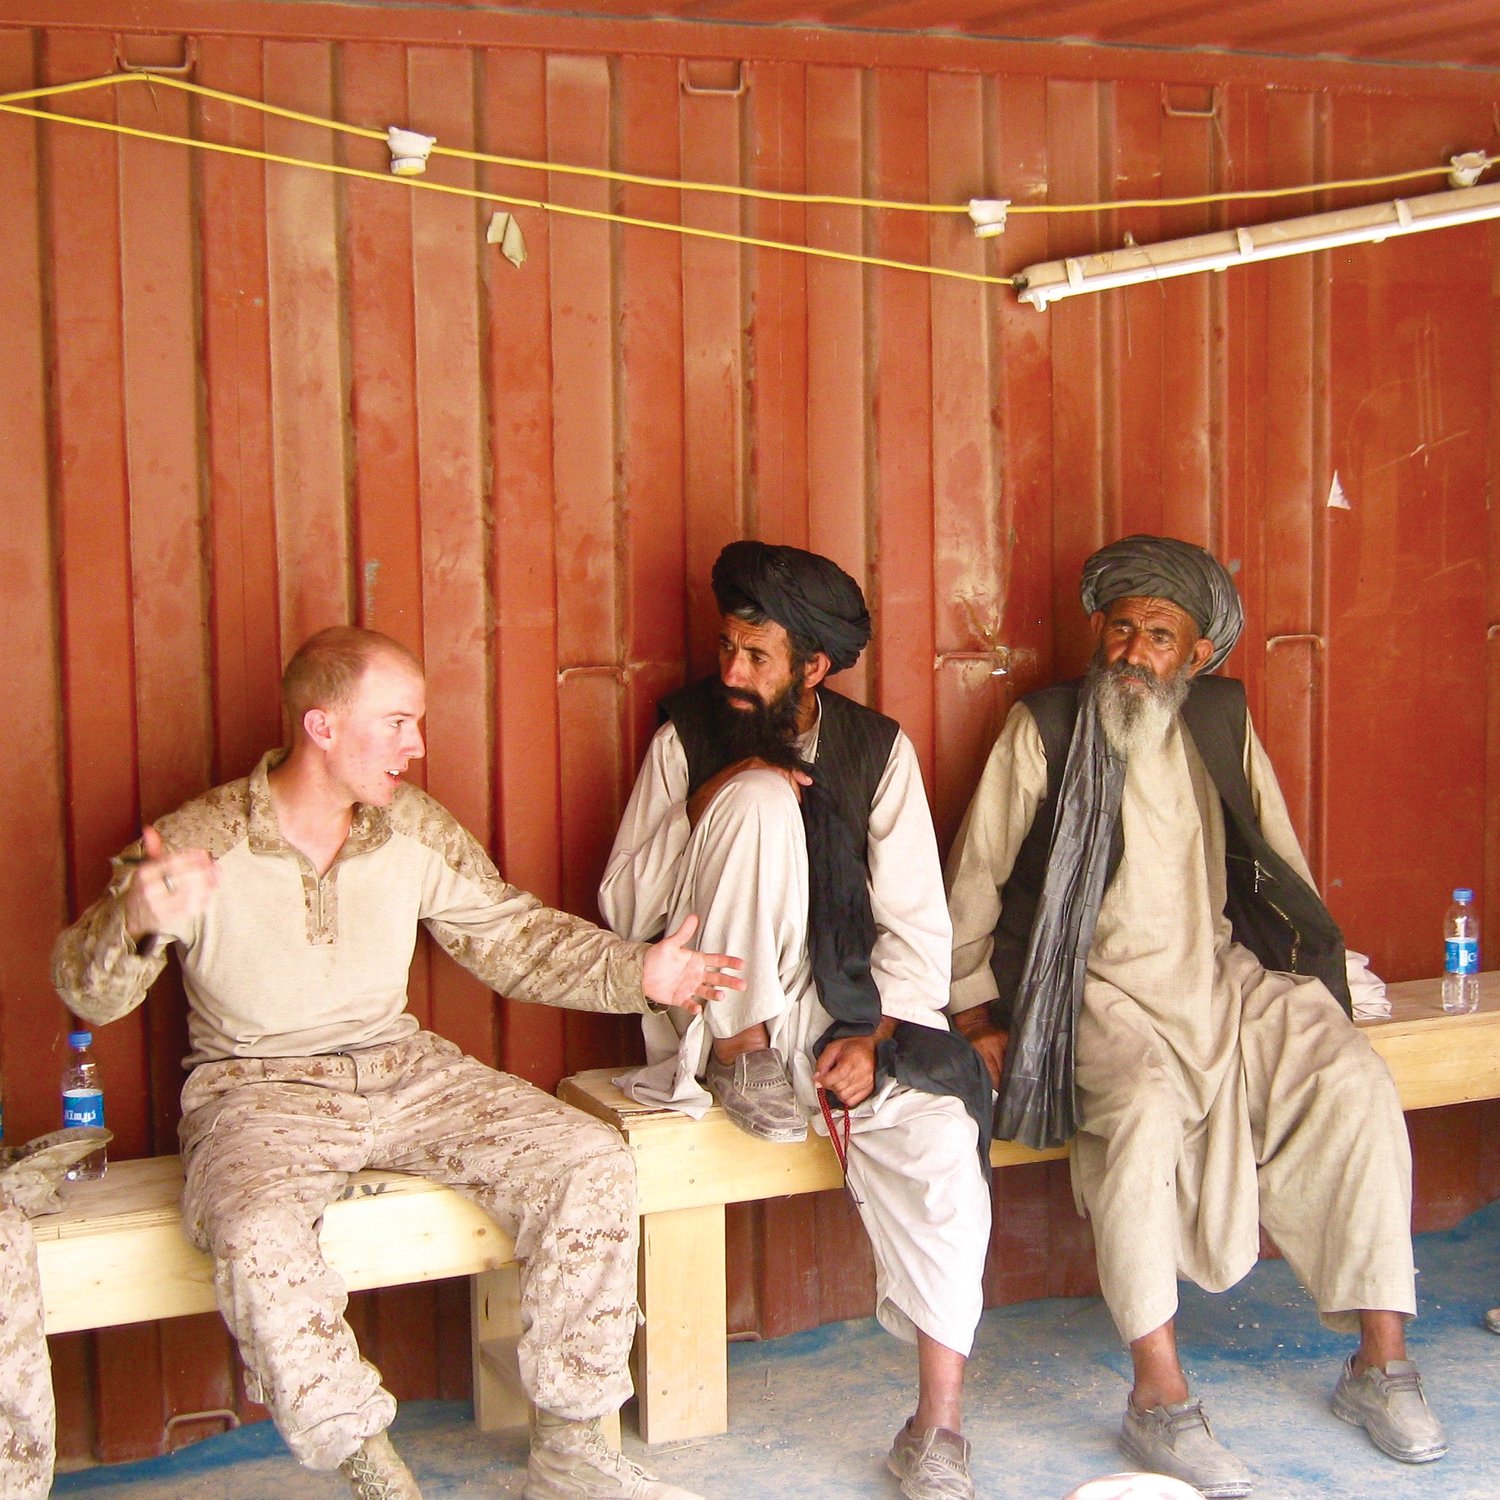 By learning the Pashto language of Afghanistan, Zaque Harig provided vital communication services while deployed.